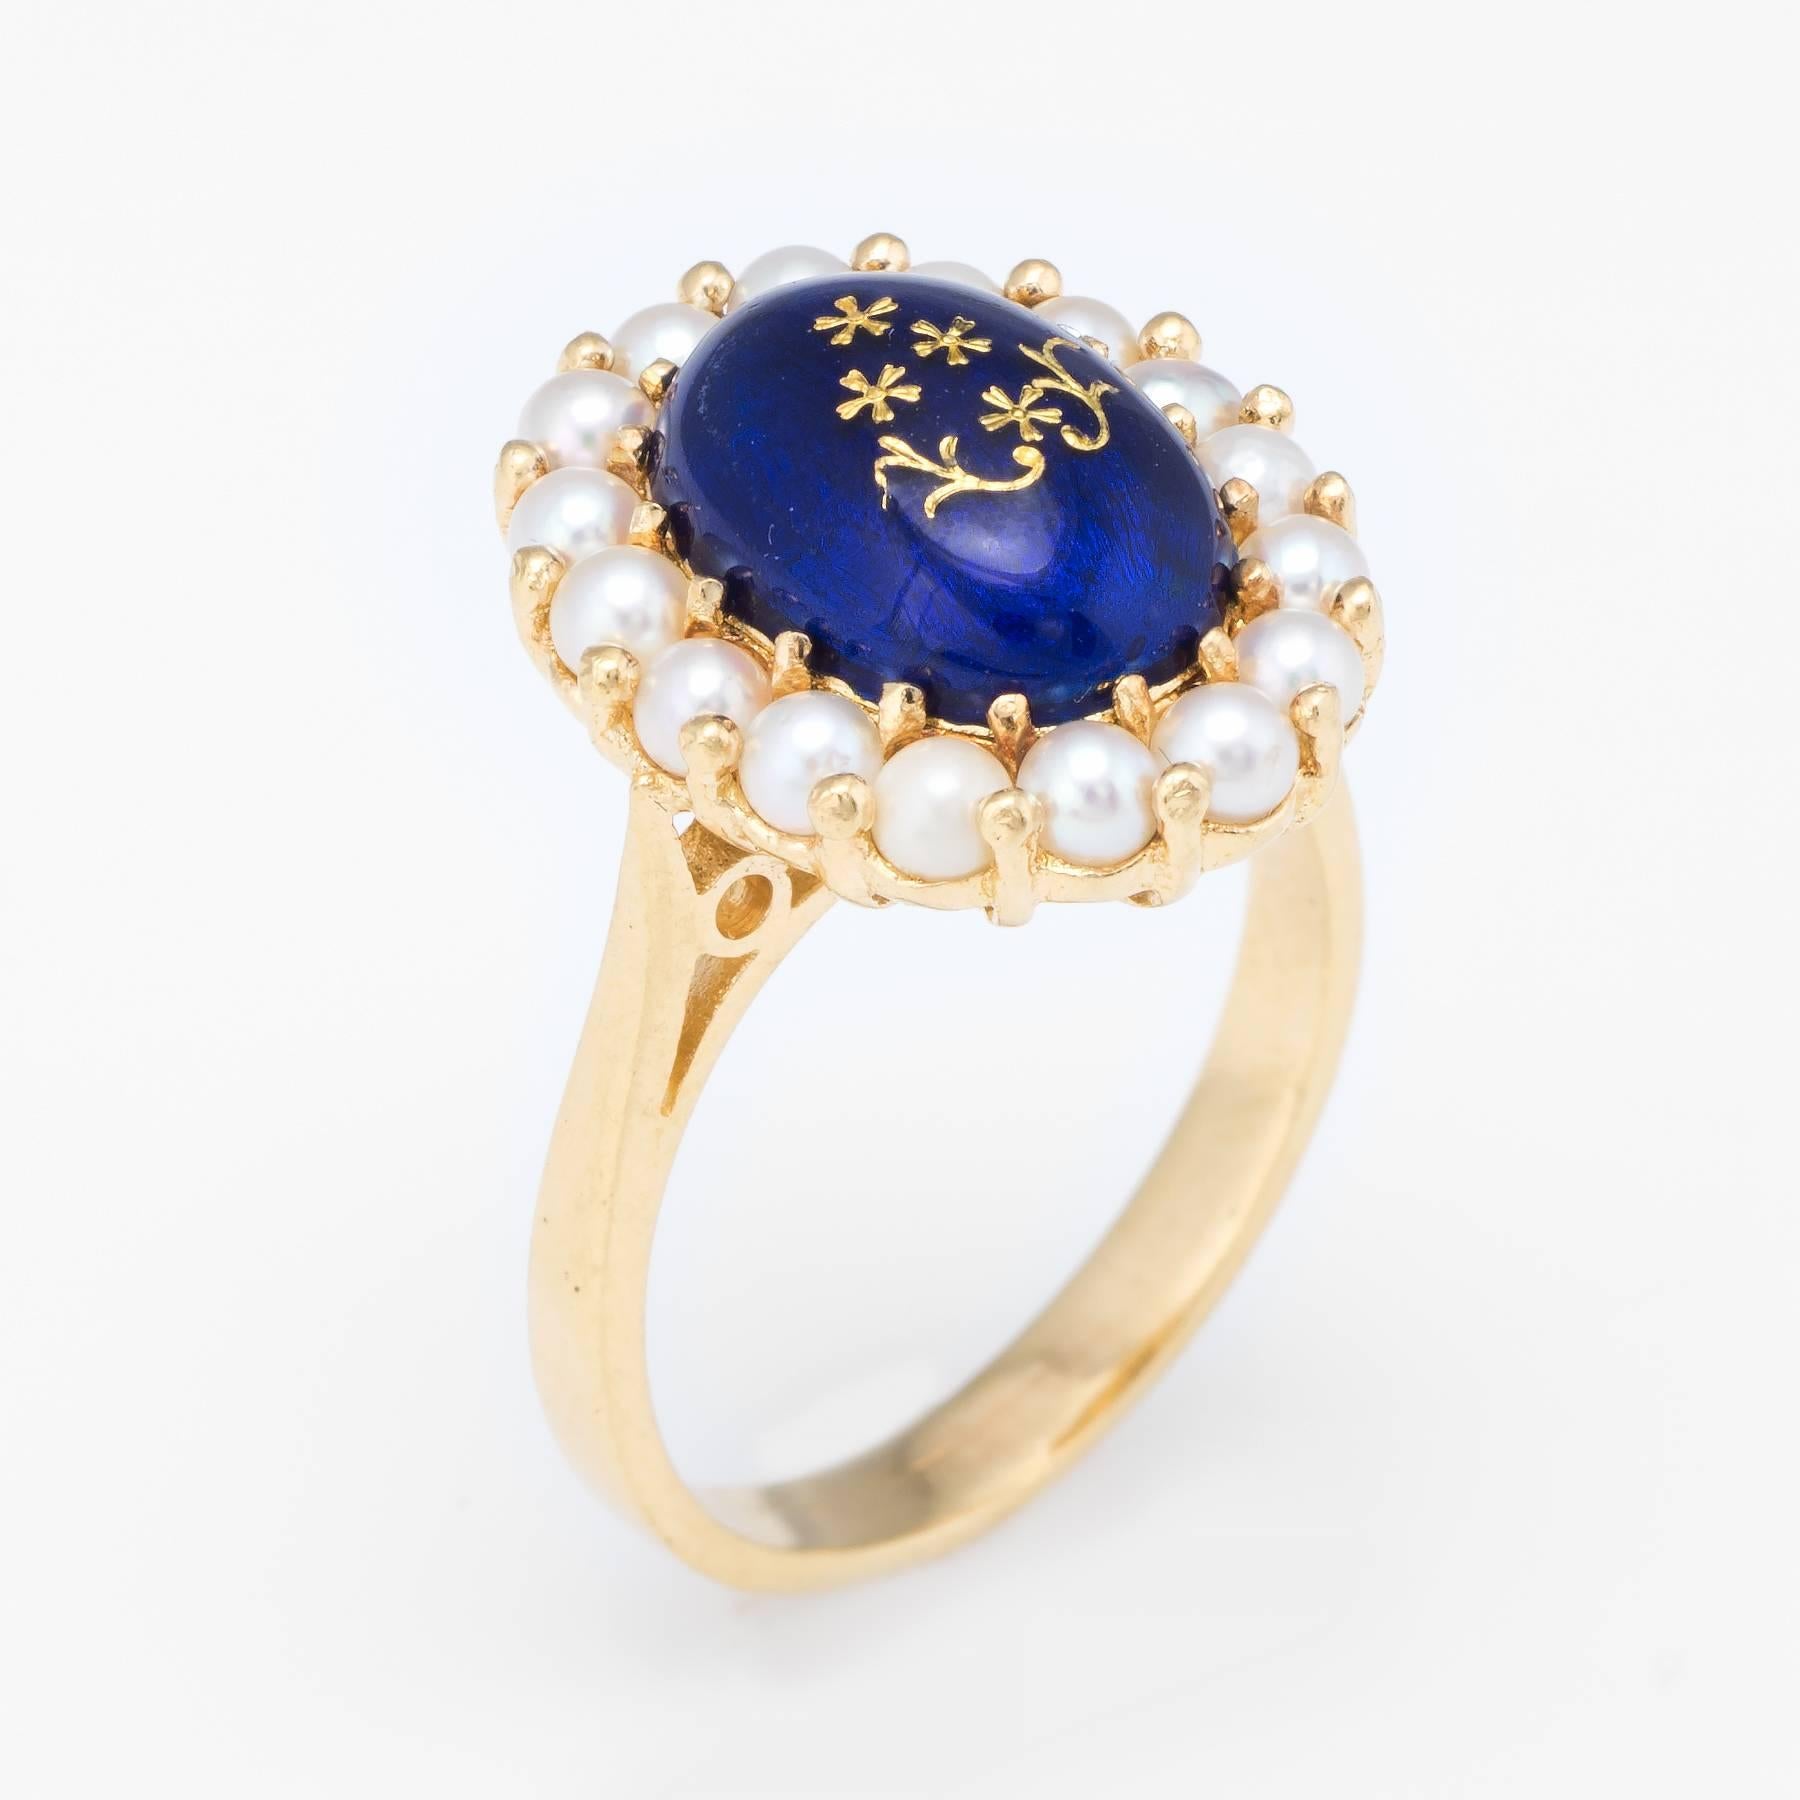 Overview:

Finely detailed vintage cocktail ring, crafted in 18 karat yellow gold. 

Cultured pearls each measure 2.5mm, framing a domed blue enamel center with decorative gold floral detail. 
The pearls are well matching, lustrous and show rose